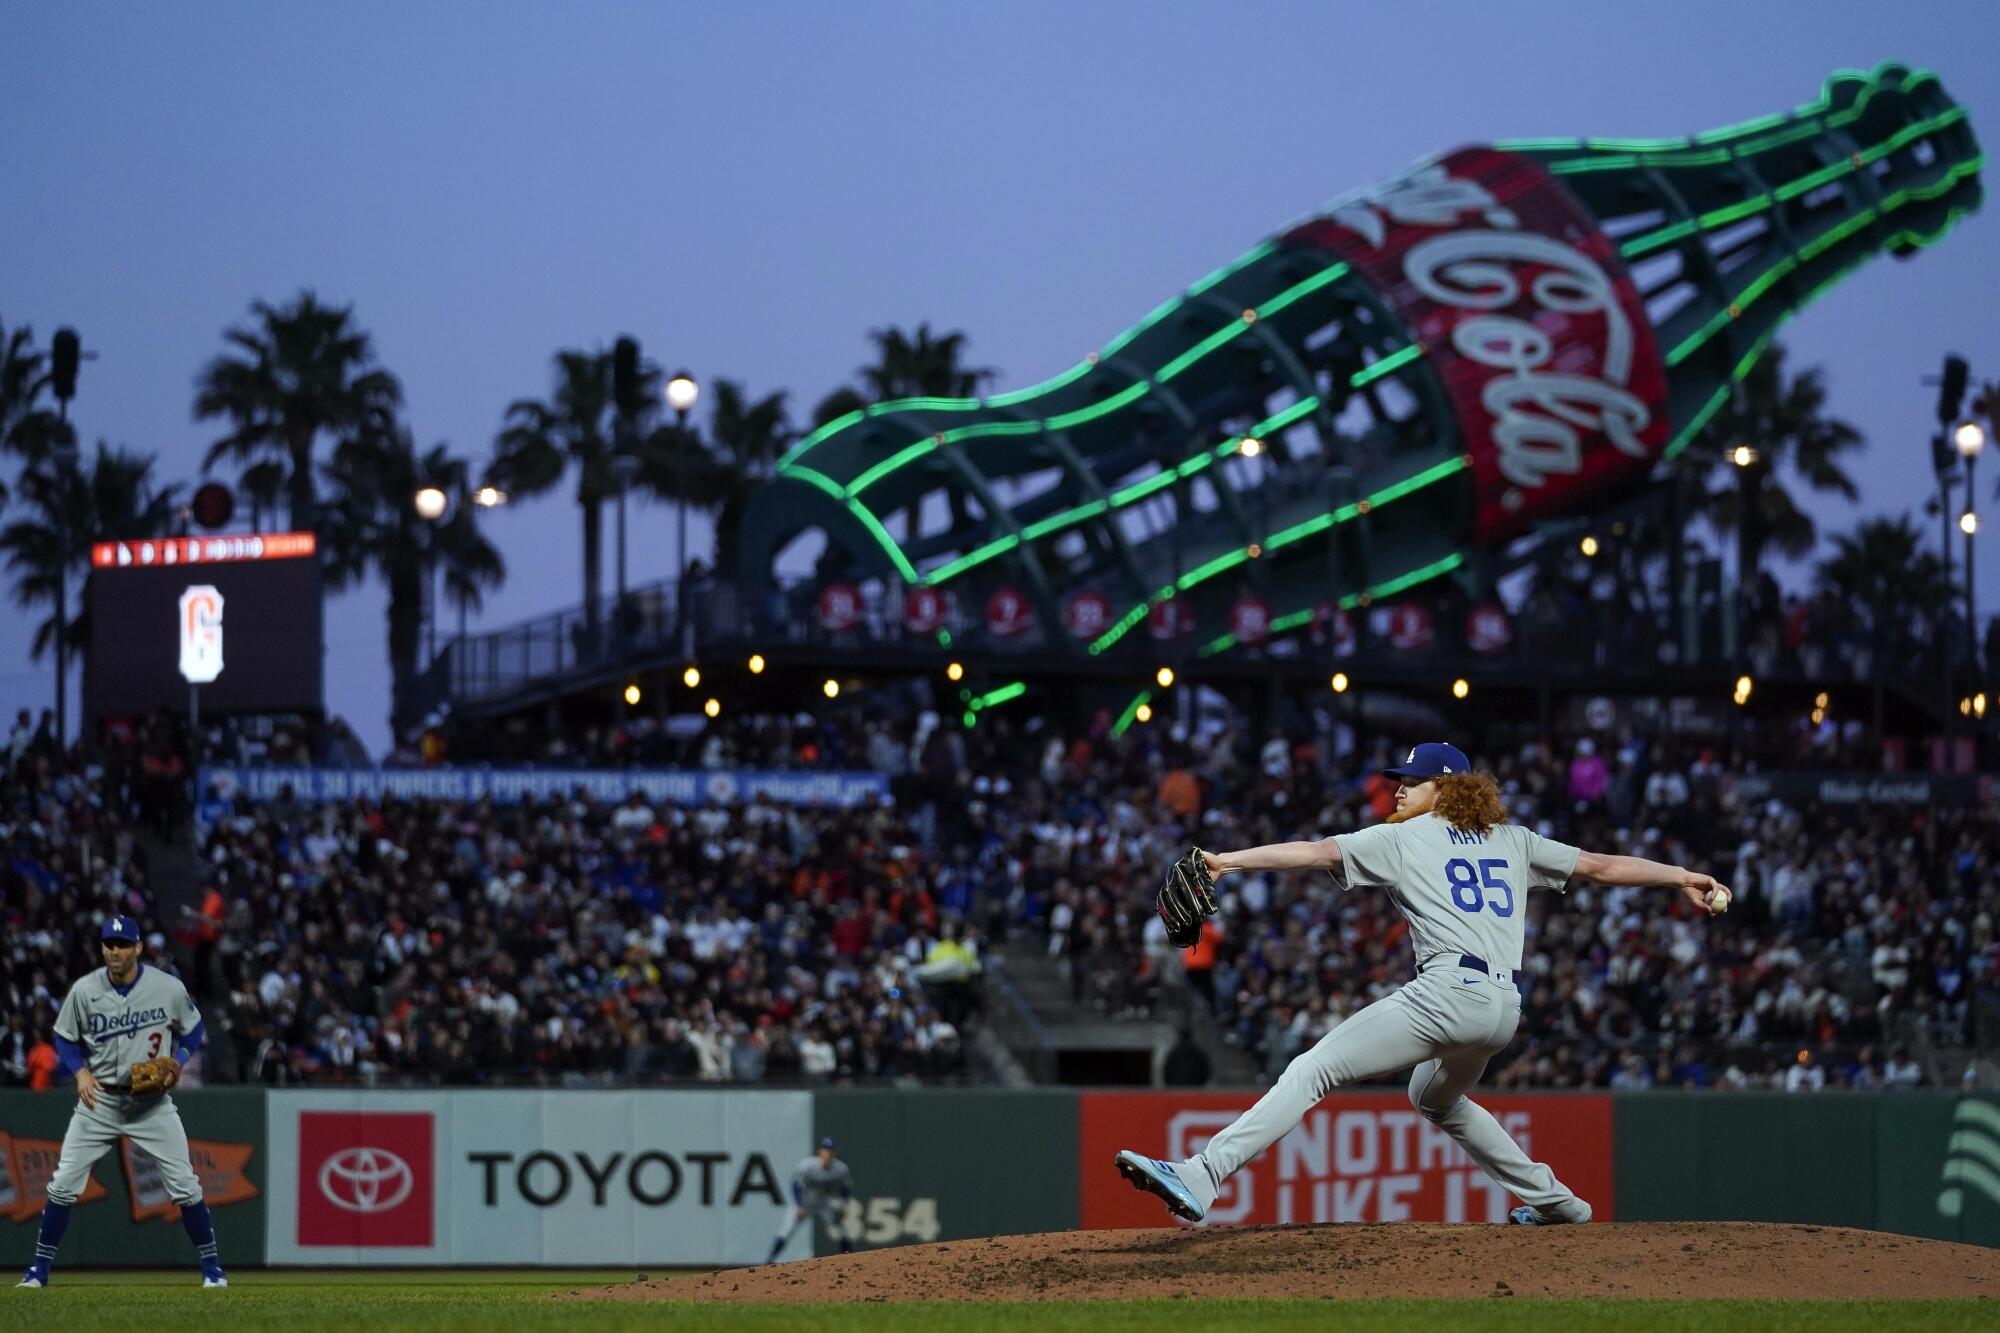 Dodgers @ Giants – June 10, 2022: The rivalry resumes with Walker